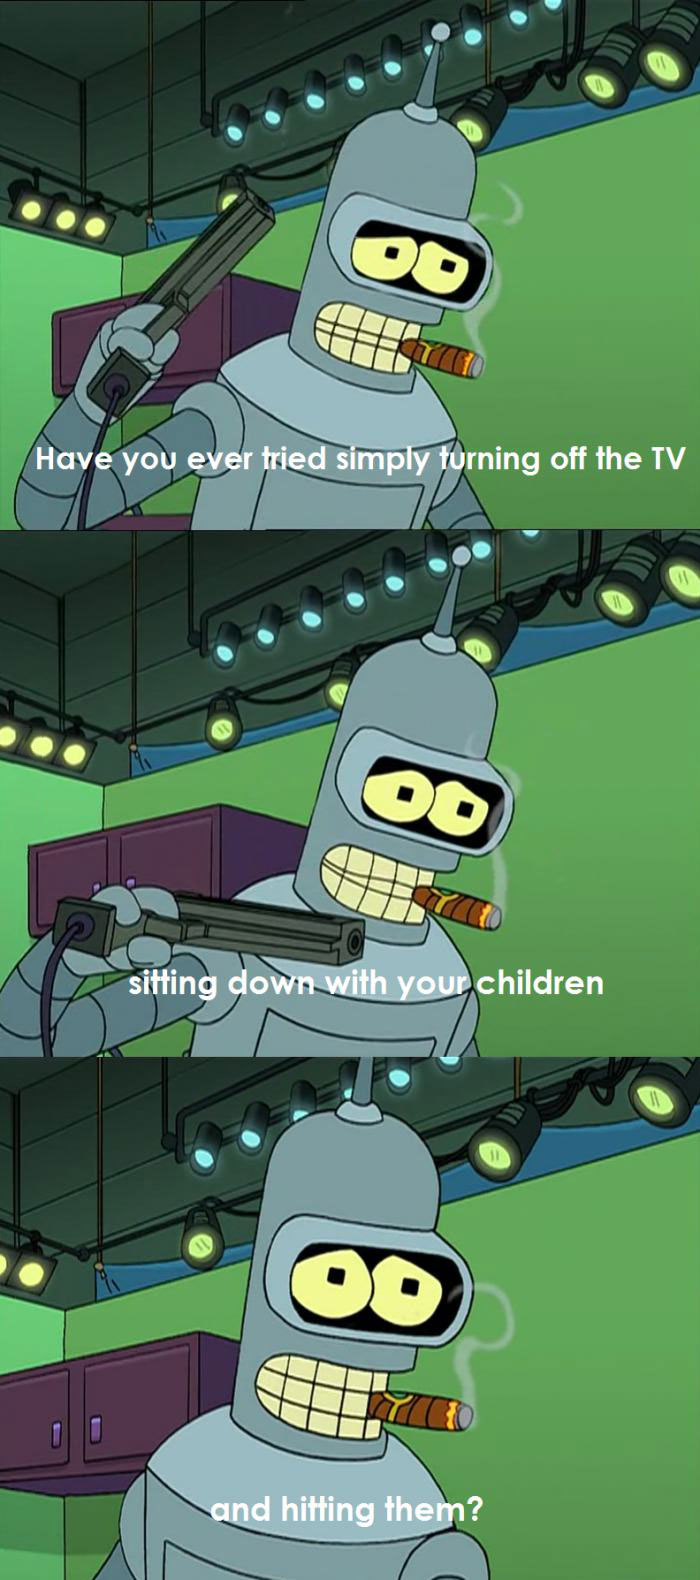 how you ever tried simply turning off the tv, sitting down with your children, and hitting them?, futurama, bender, lol